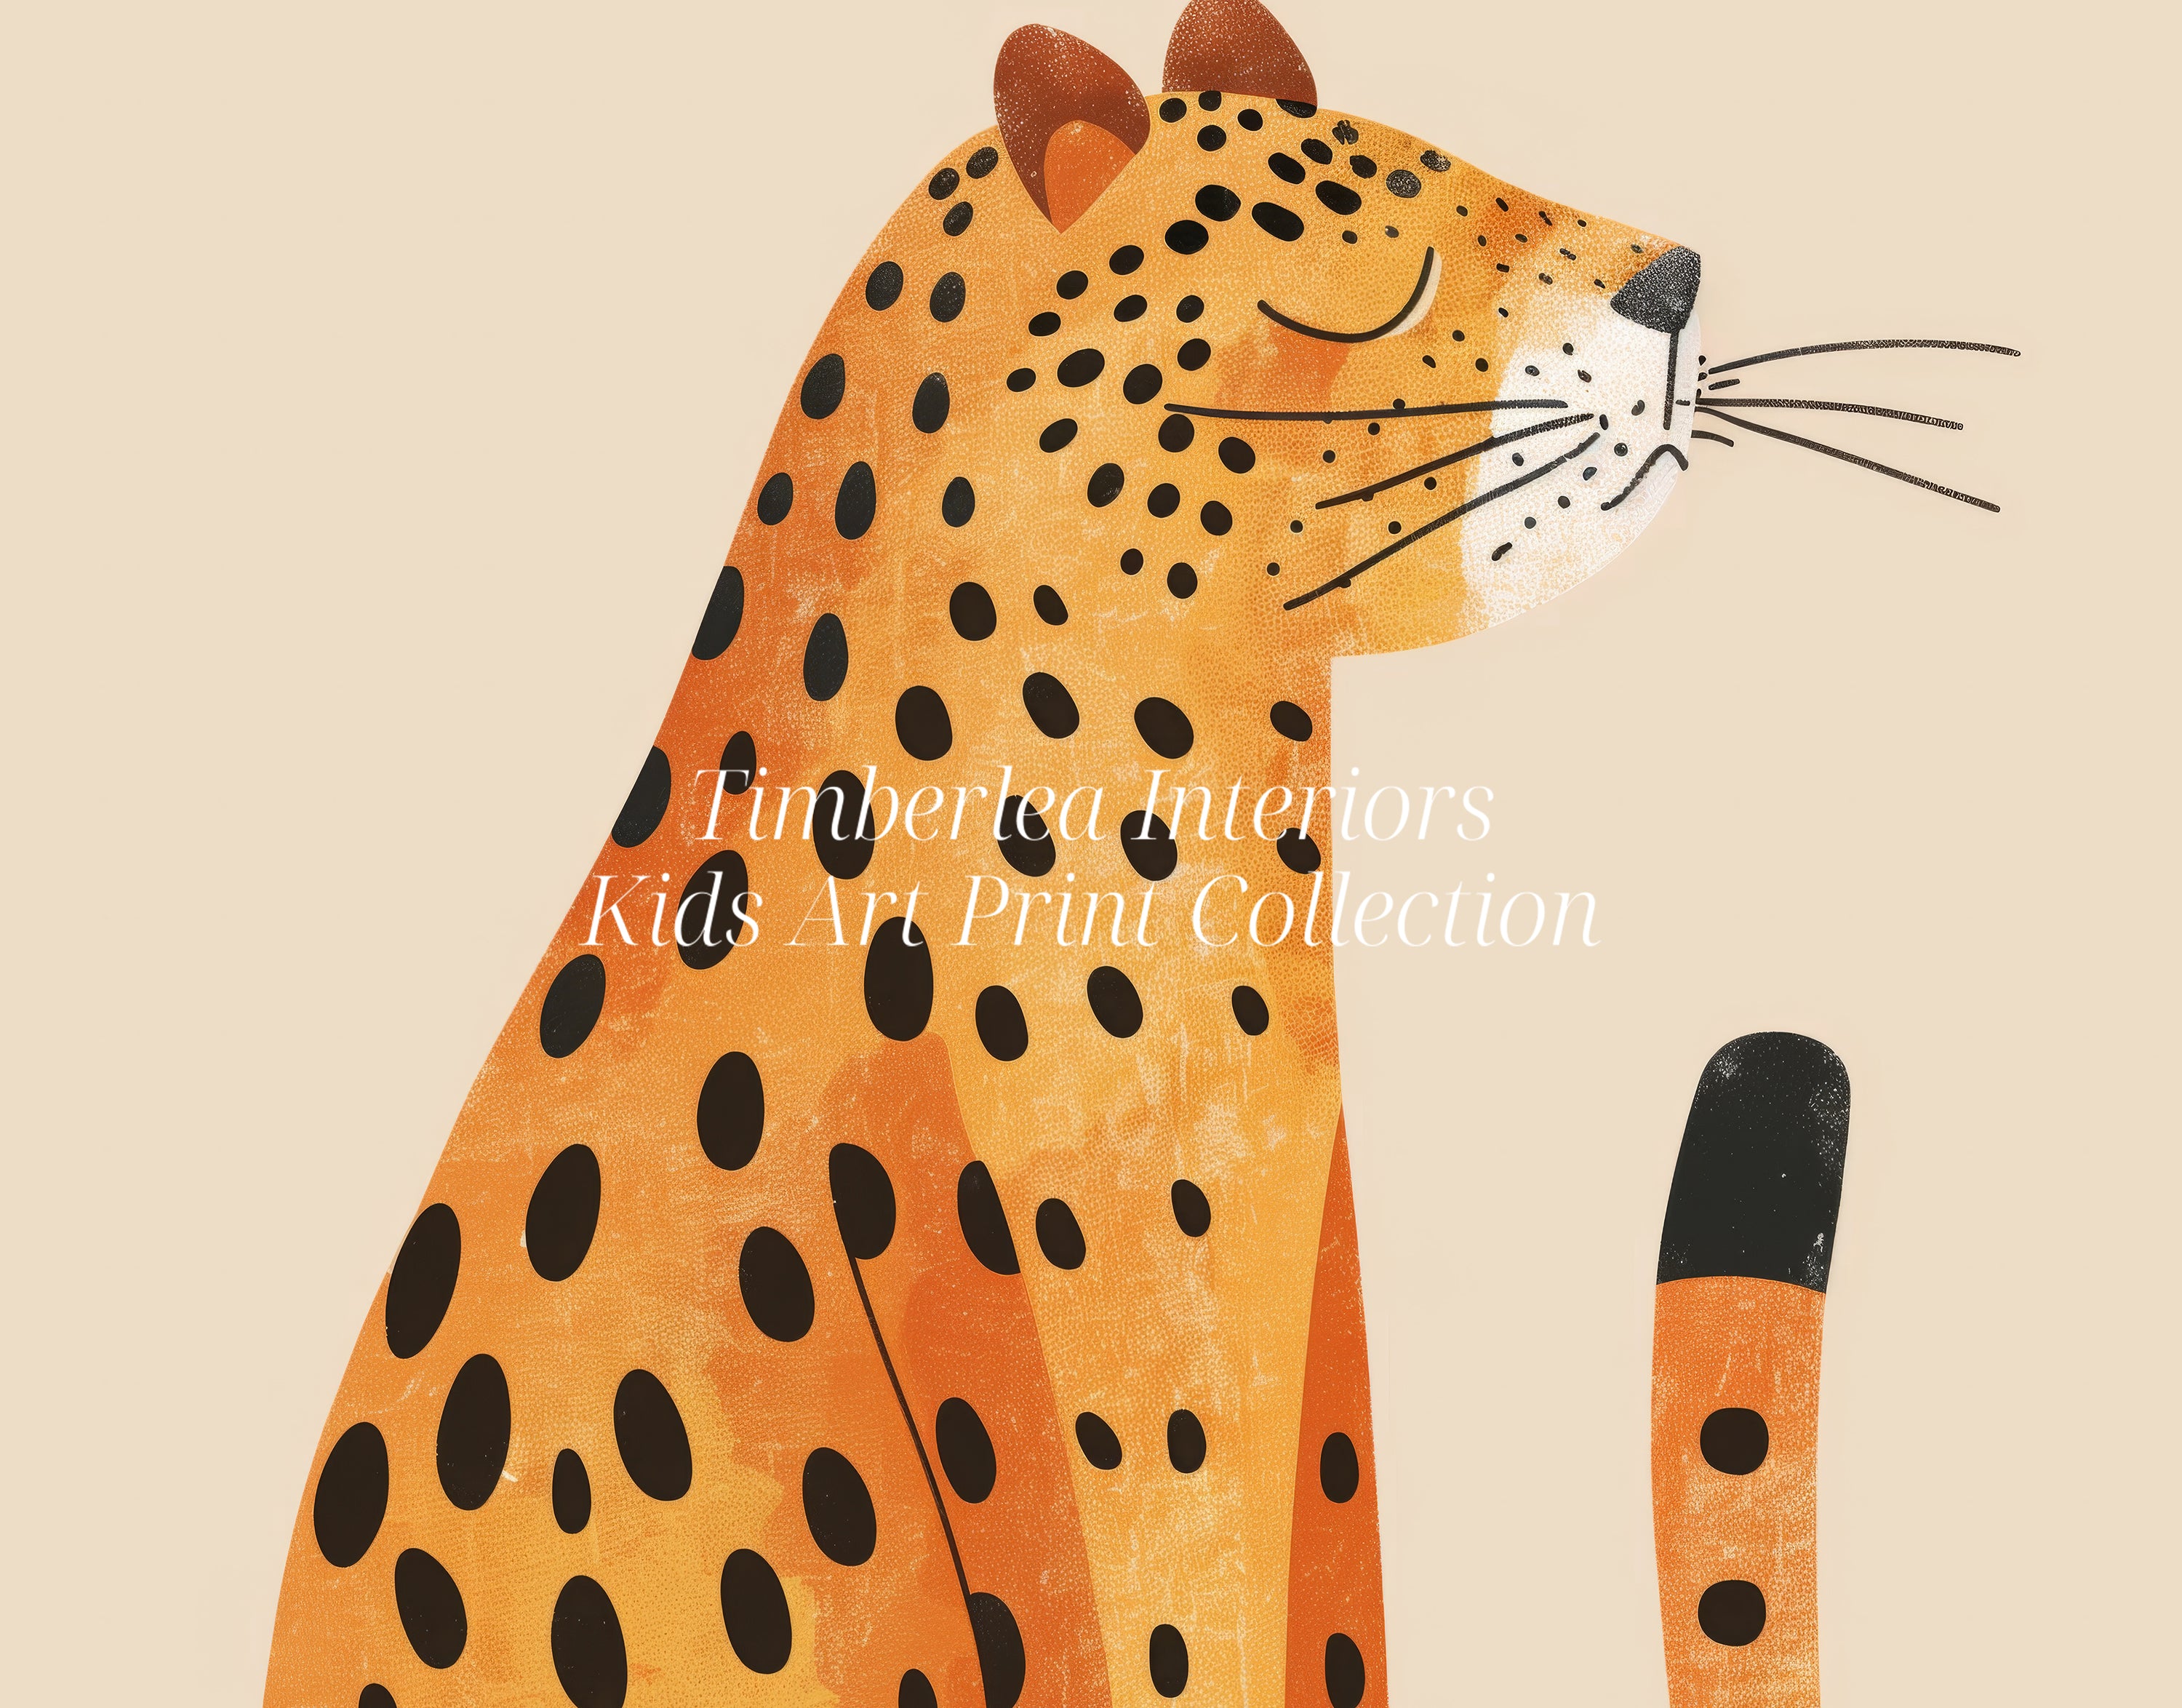 Close-up view of a serene art print featuring a tranquil leopard sitting peacefully against a soft beige background.